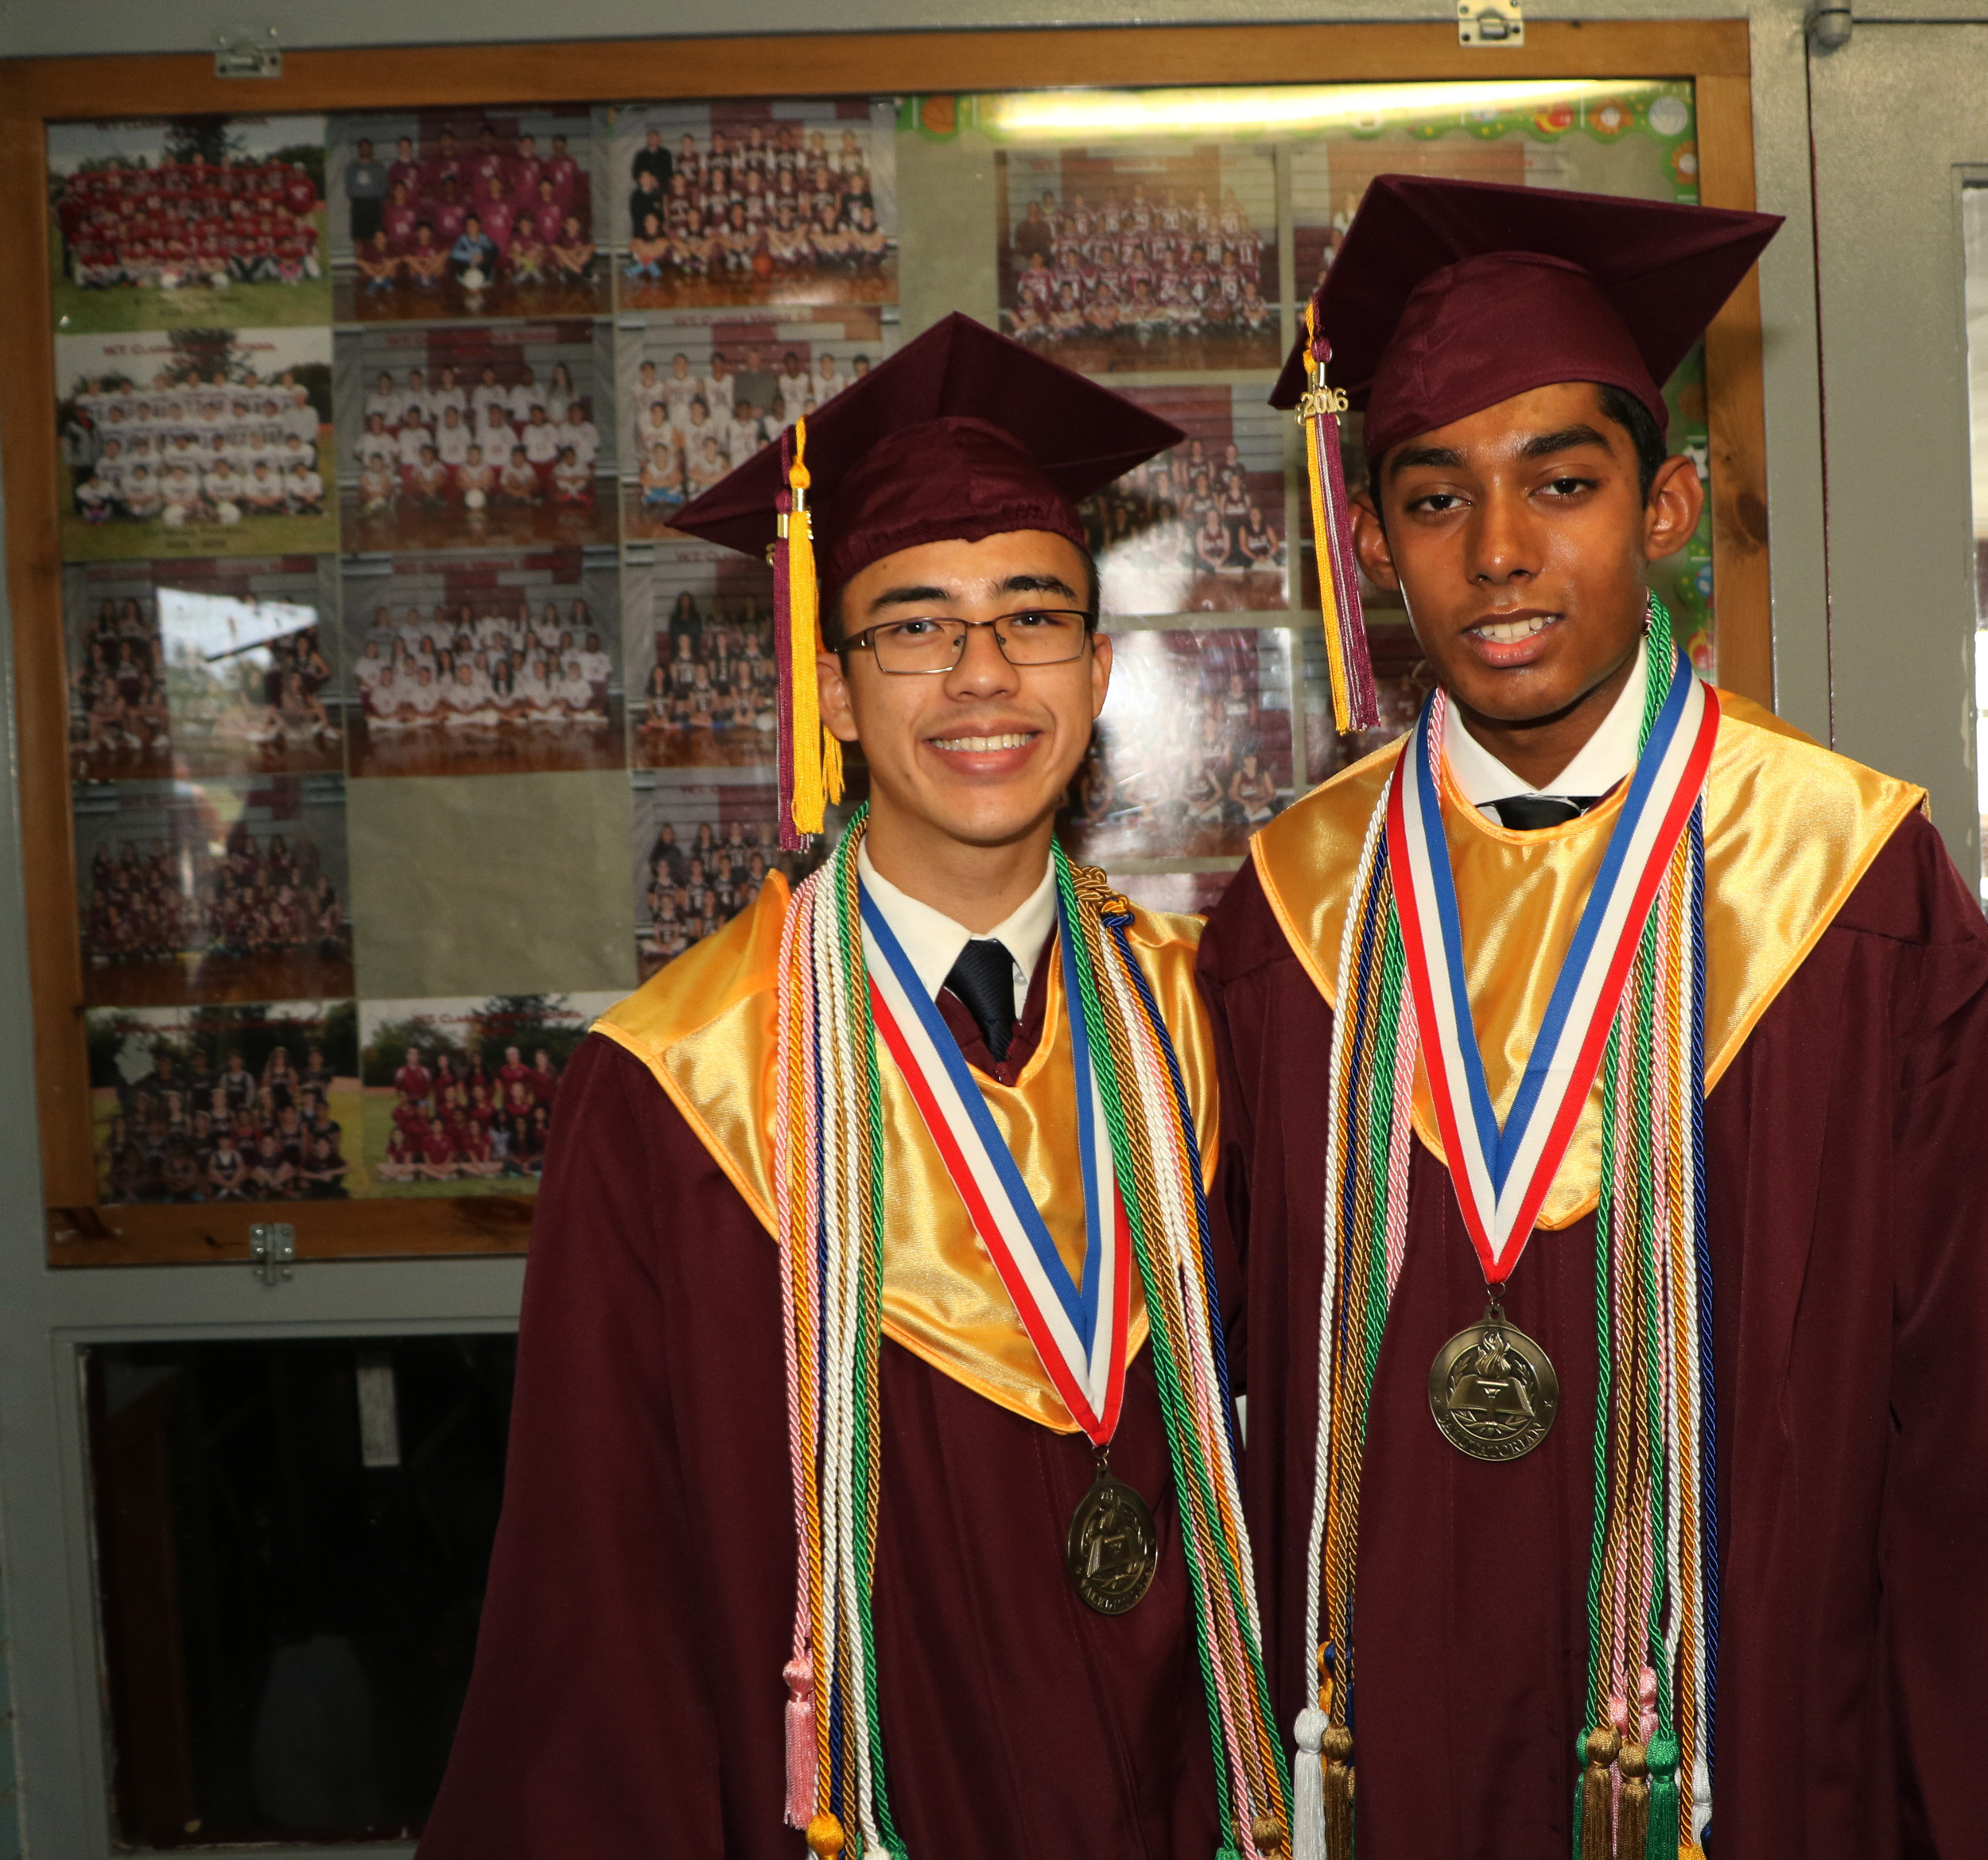 Melkun and Seerattan looked forward to speaking to their peers at graduation.